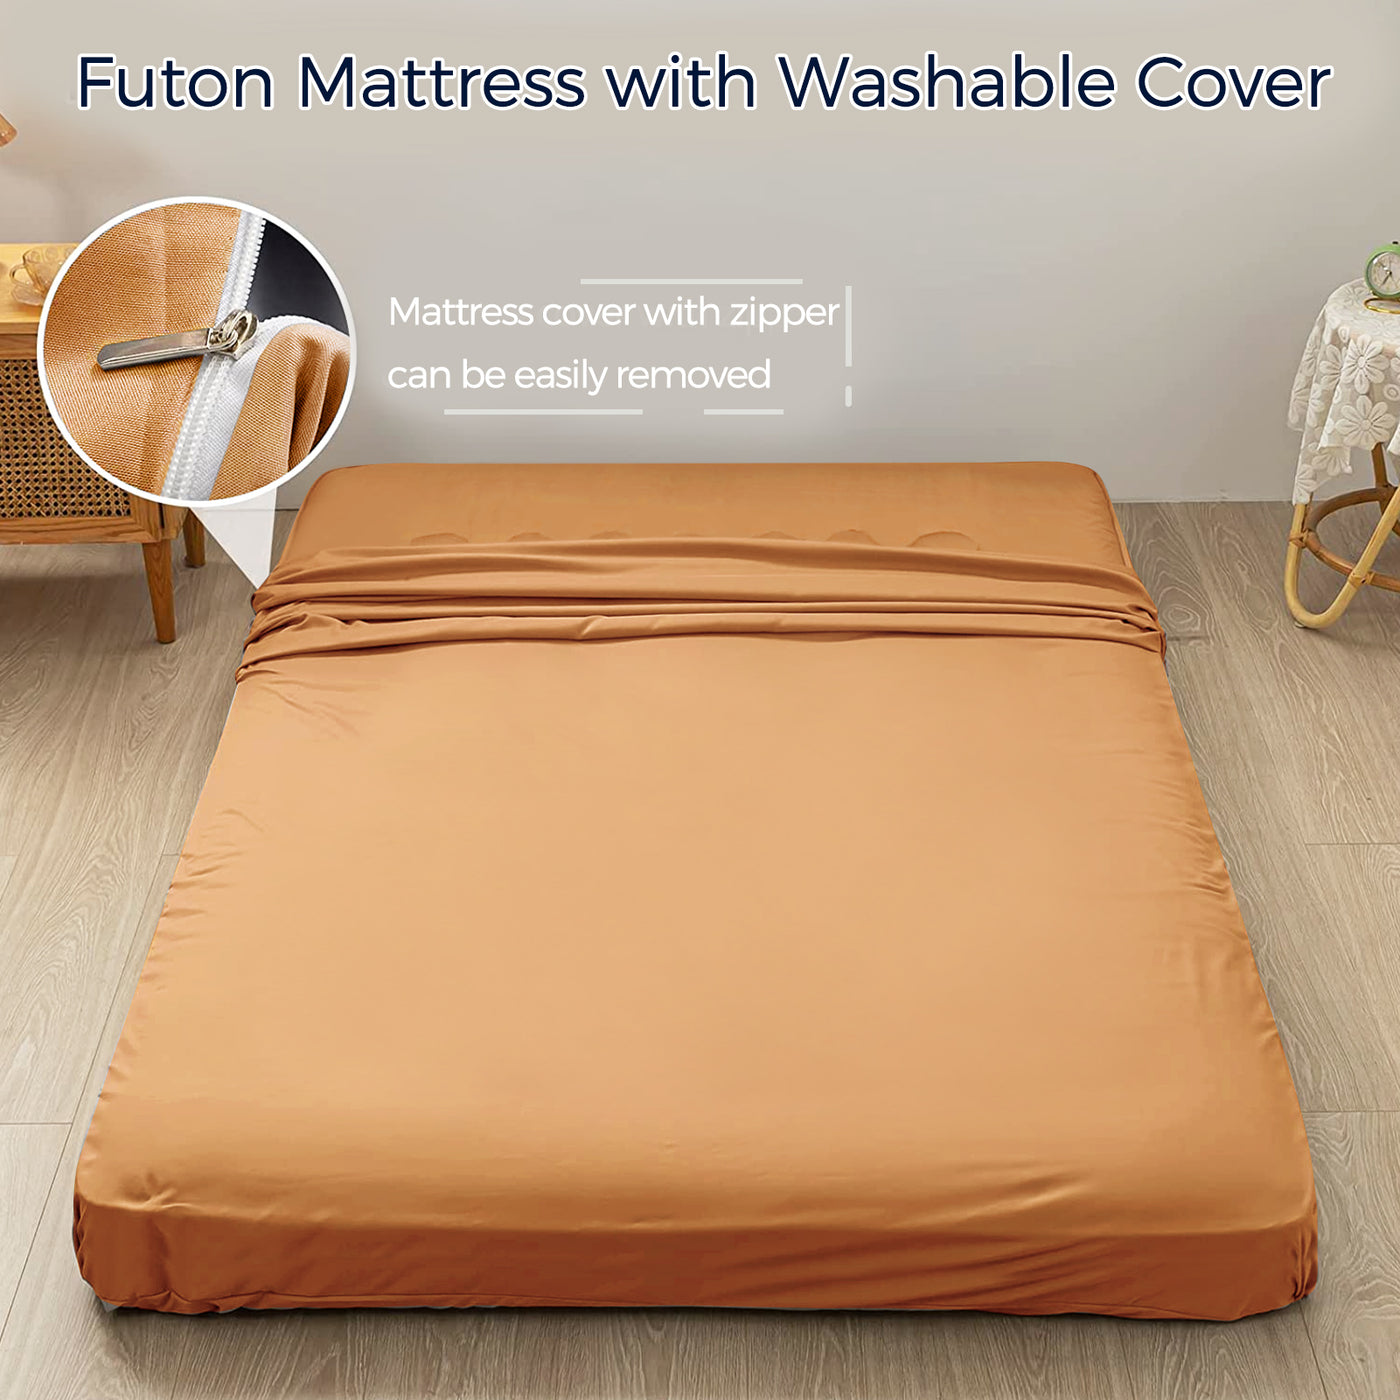 MAXYOYO 6" Extra Thick Floor Futon Mattress, Wave Quilted, Light Brown